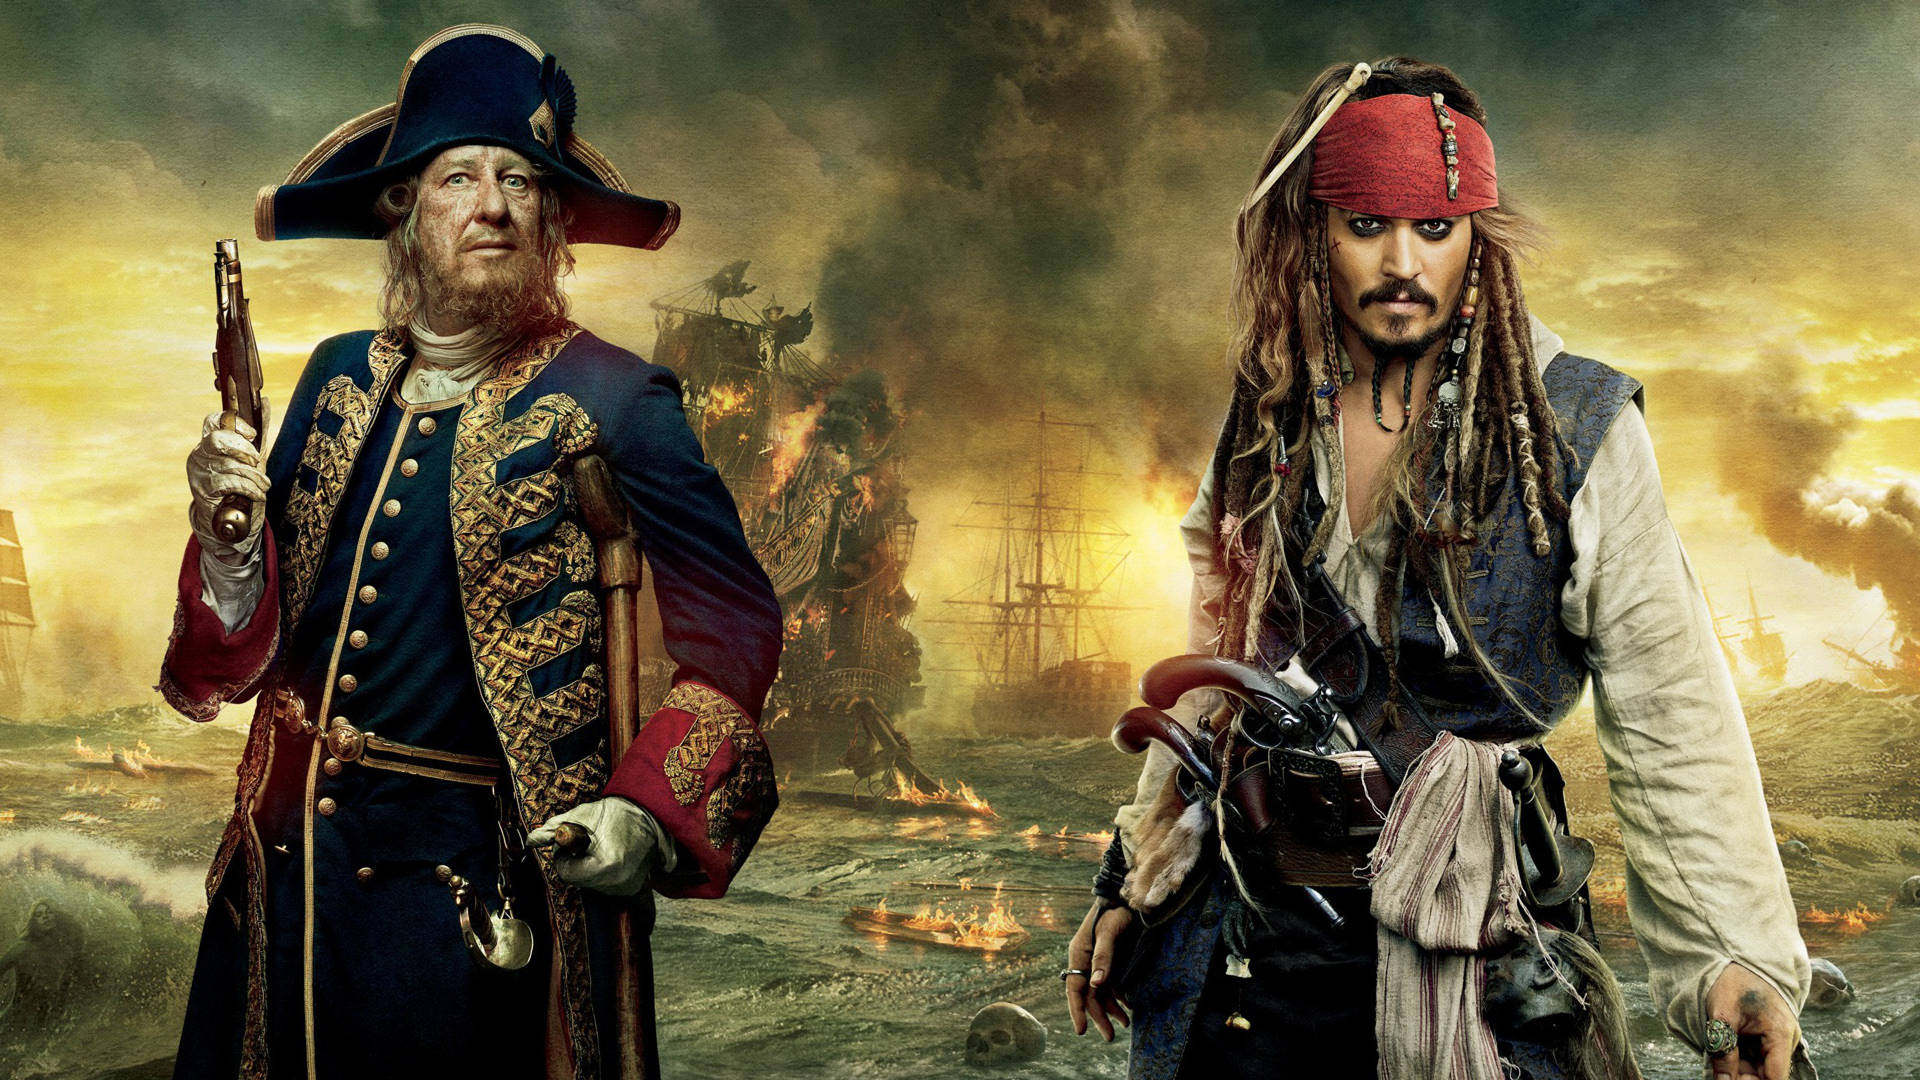 Free Pirates Of The Caribbean Wallpaper Downloads, [100+] Pirates Of The Caribbean  Wallpapers for FREE 